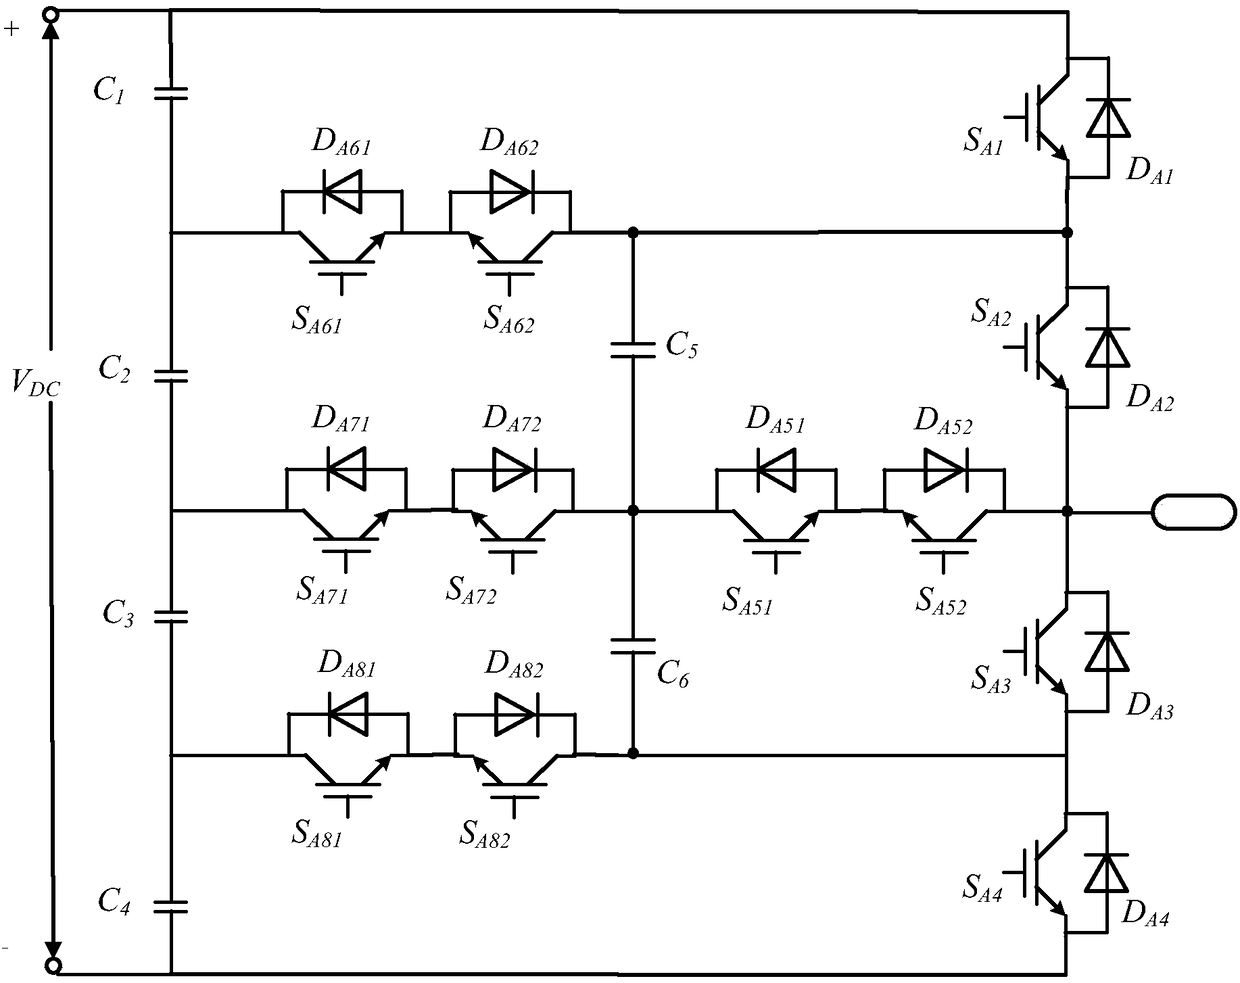 Five-level topological structure used for power conversion system